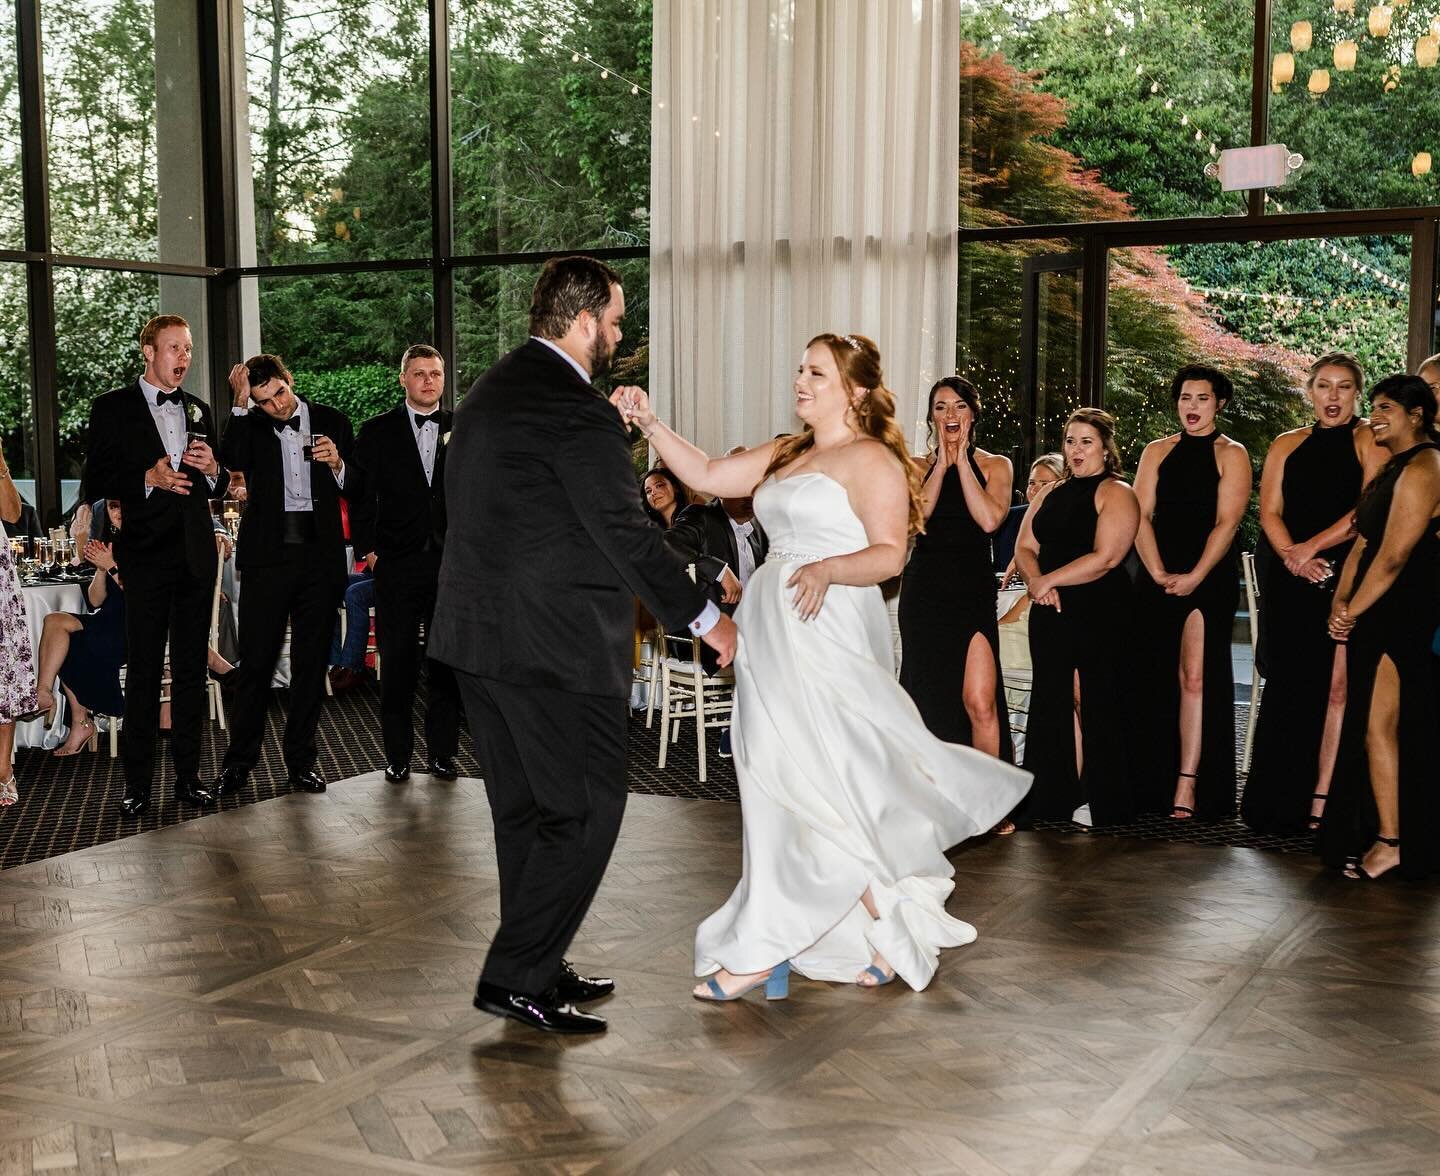 A moment for the cheerleaders 👏
We love a supportive wedding party and this crew nailed it! As Nikki and Brad twirled into forever, they knew they were surrounded by the love and support of their best friends. 

Photo: @rivetevents
Venue: @the_atriu